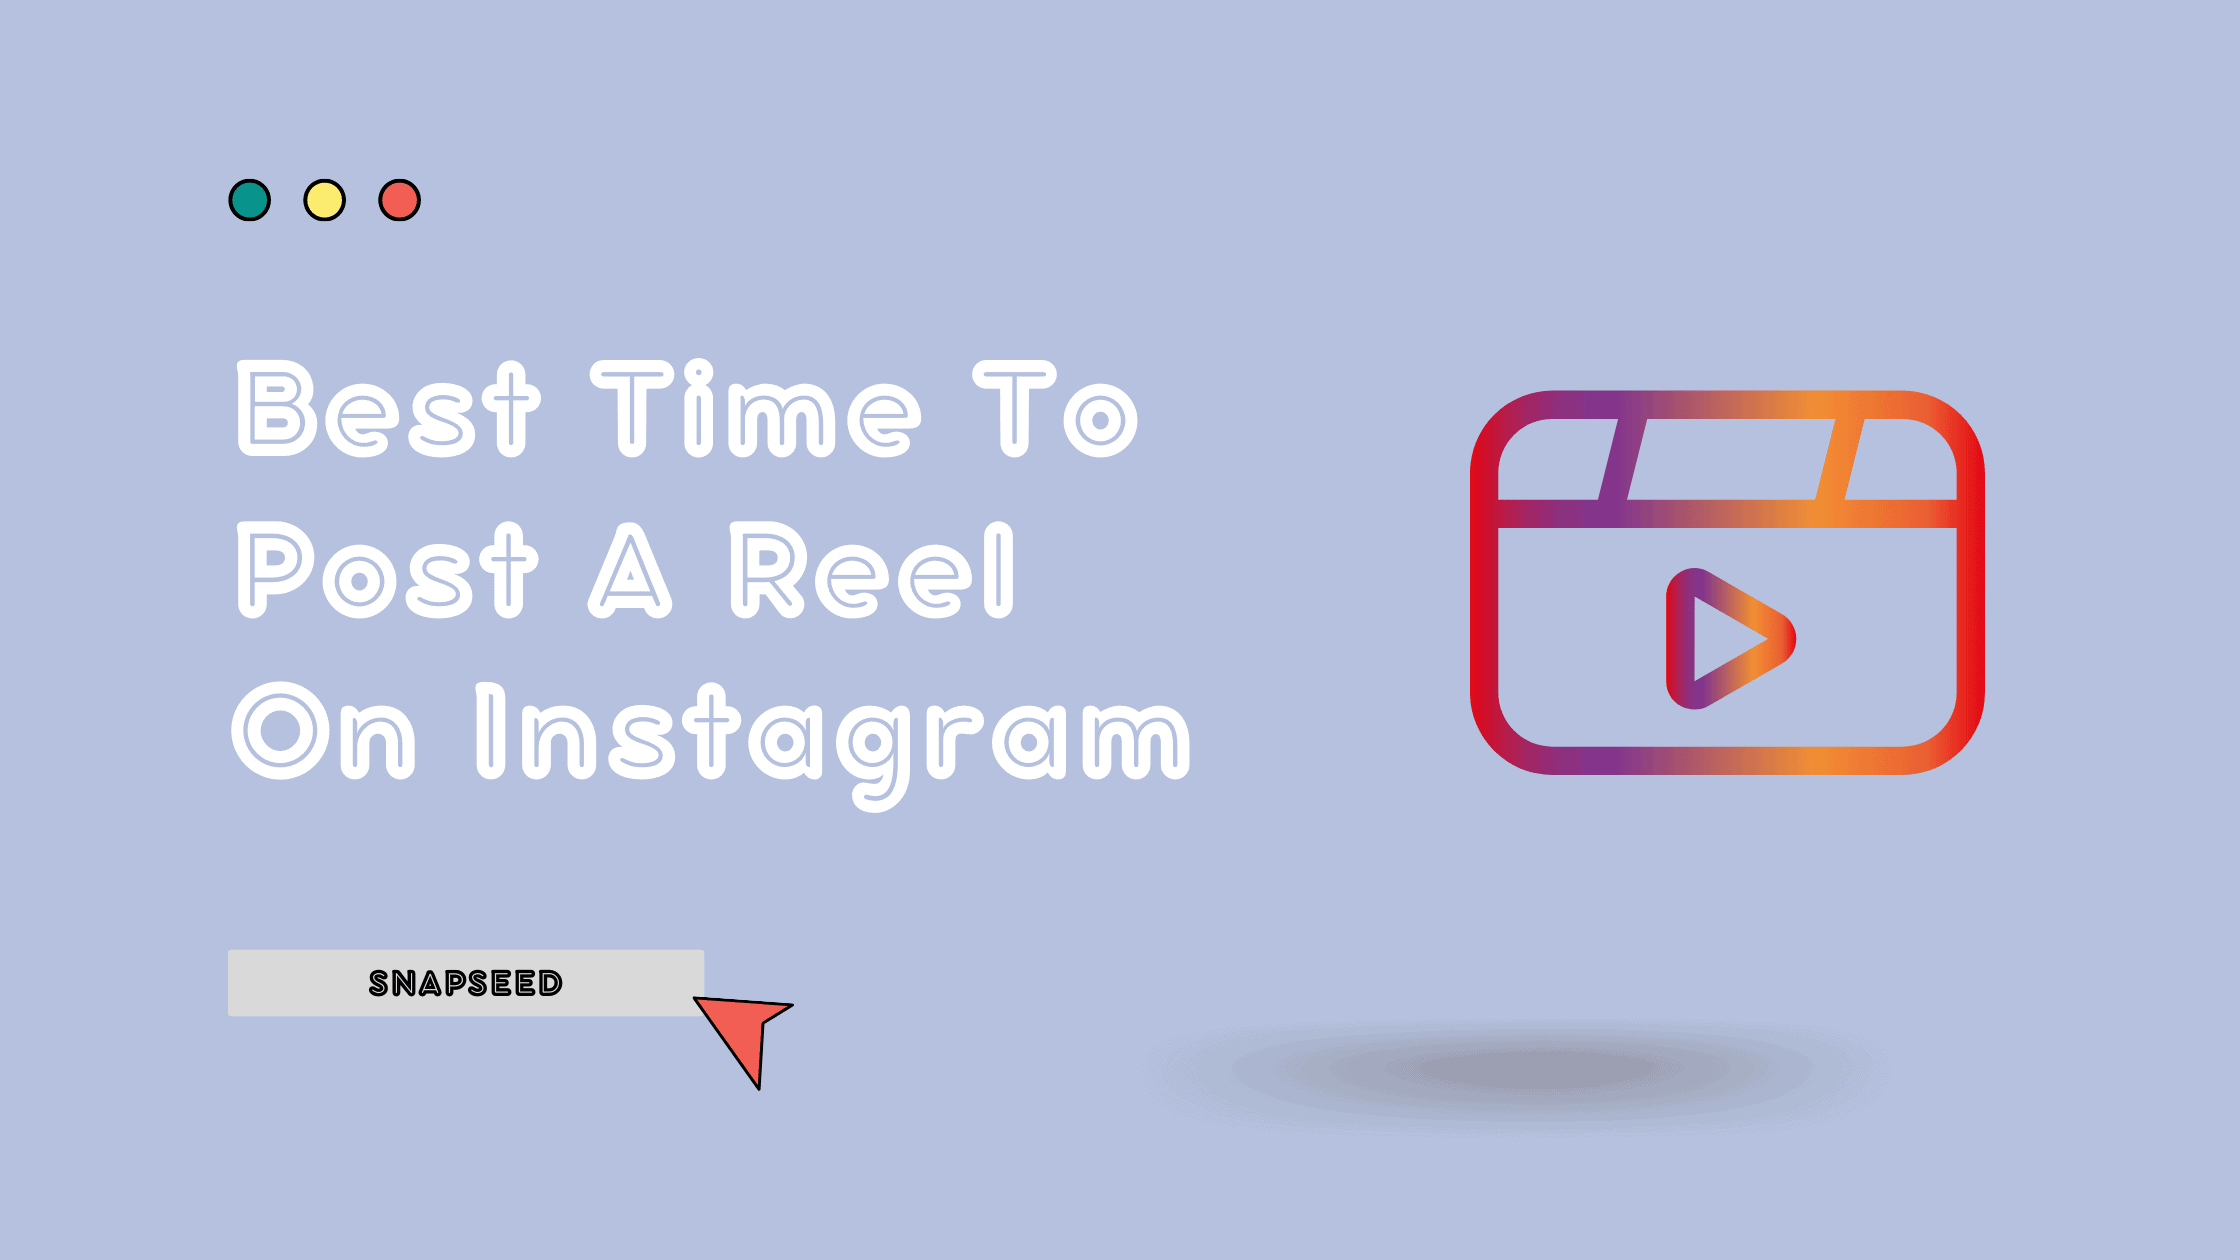 Best Time To Post A Reel On Instagram - Snapseed